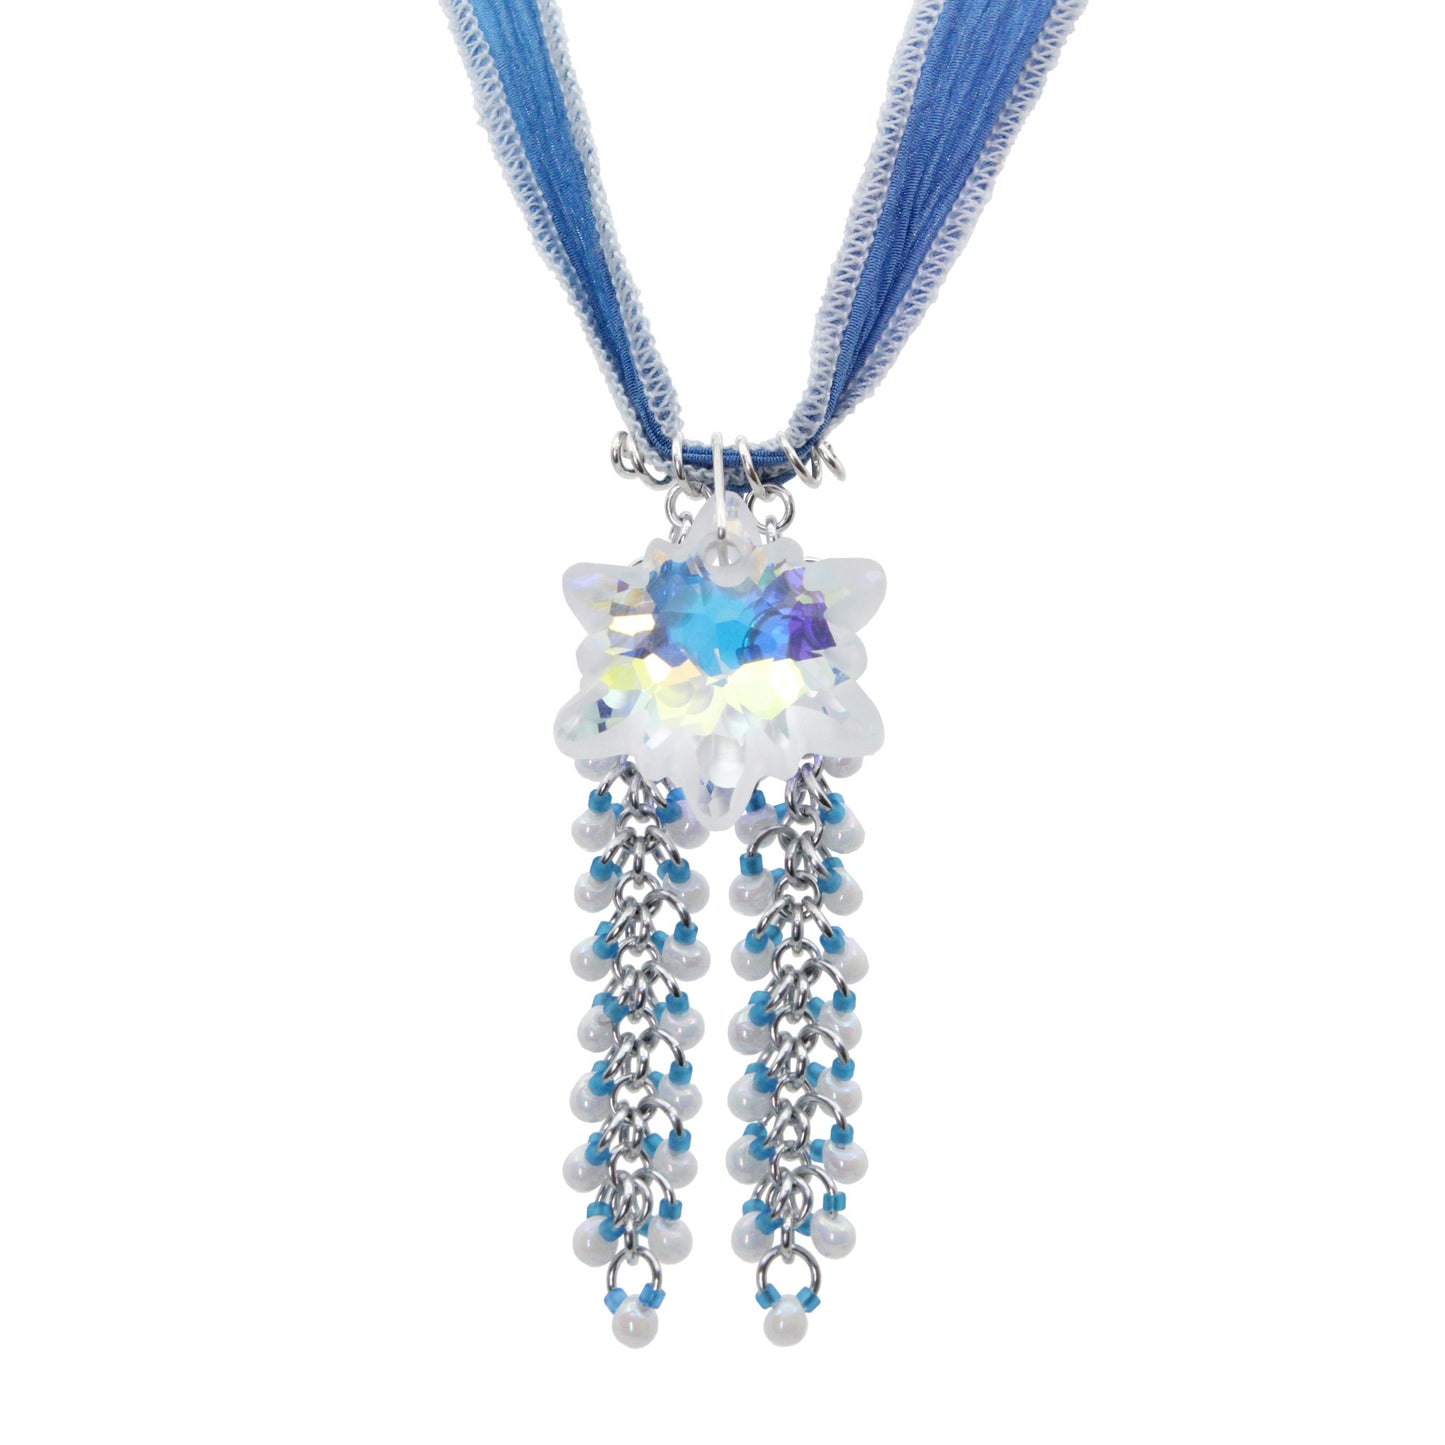 Edelweiss Crystal Necklace / blue and white hand dyed ribbon / 28mm partly frosted rainbow crystal